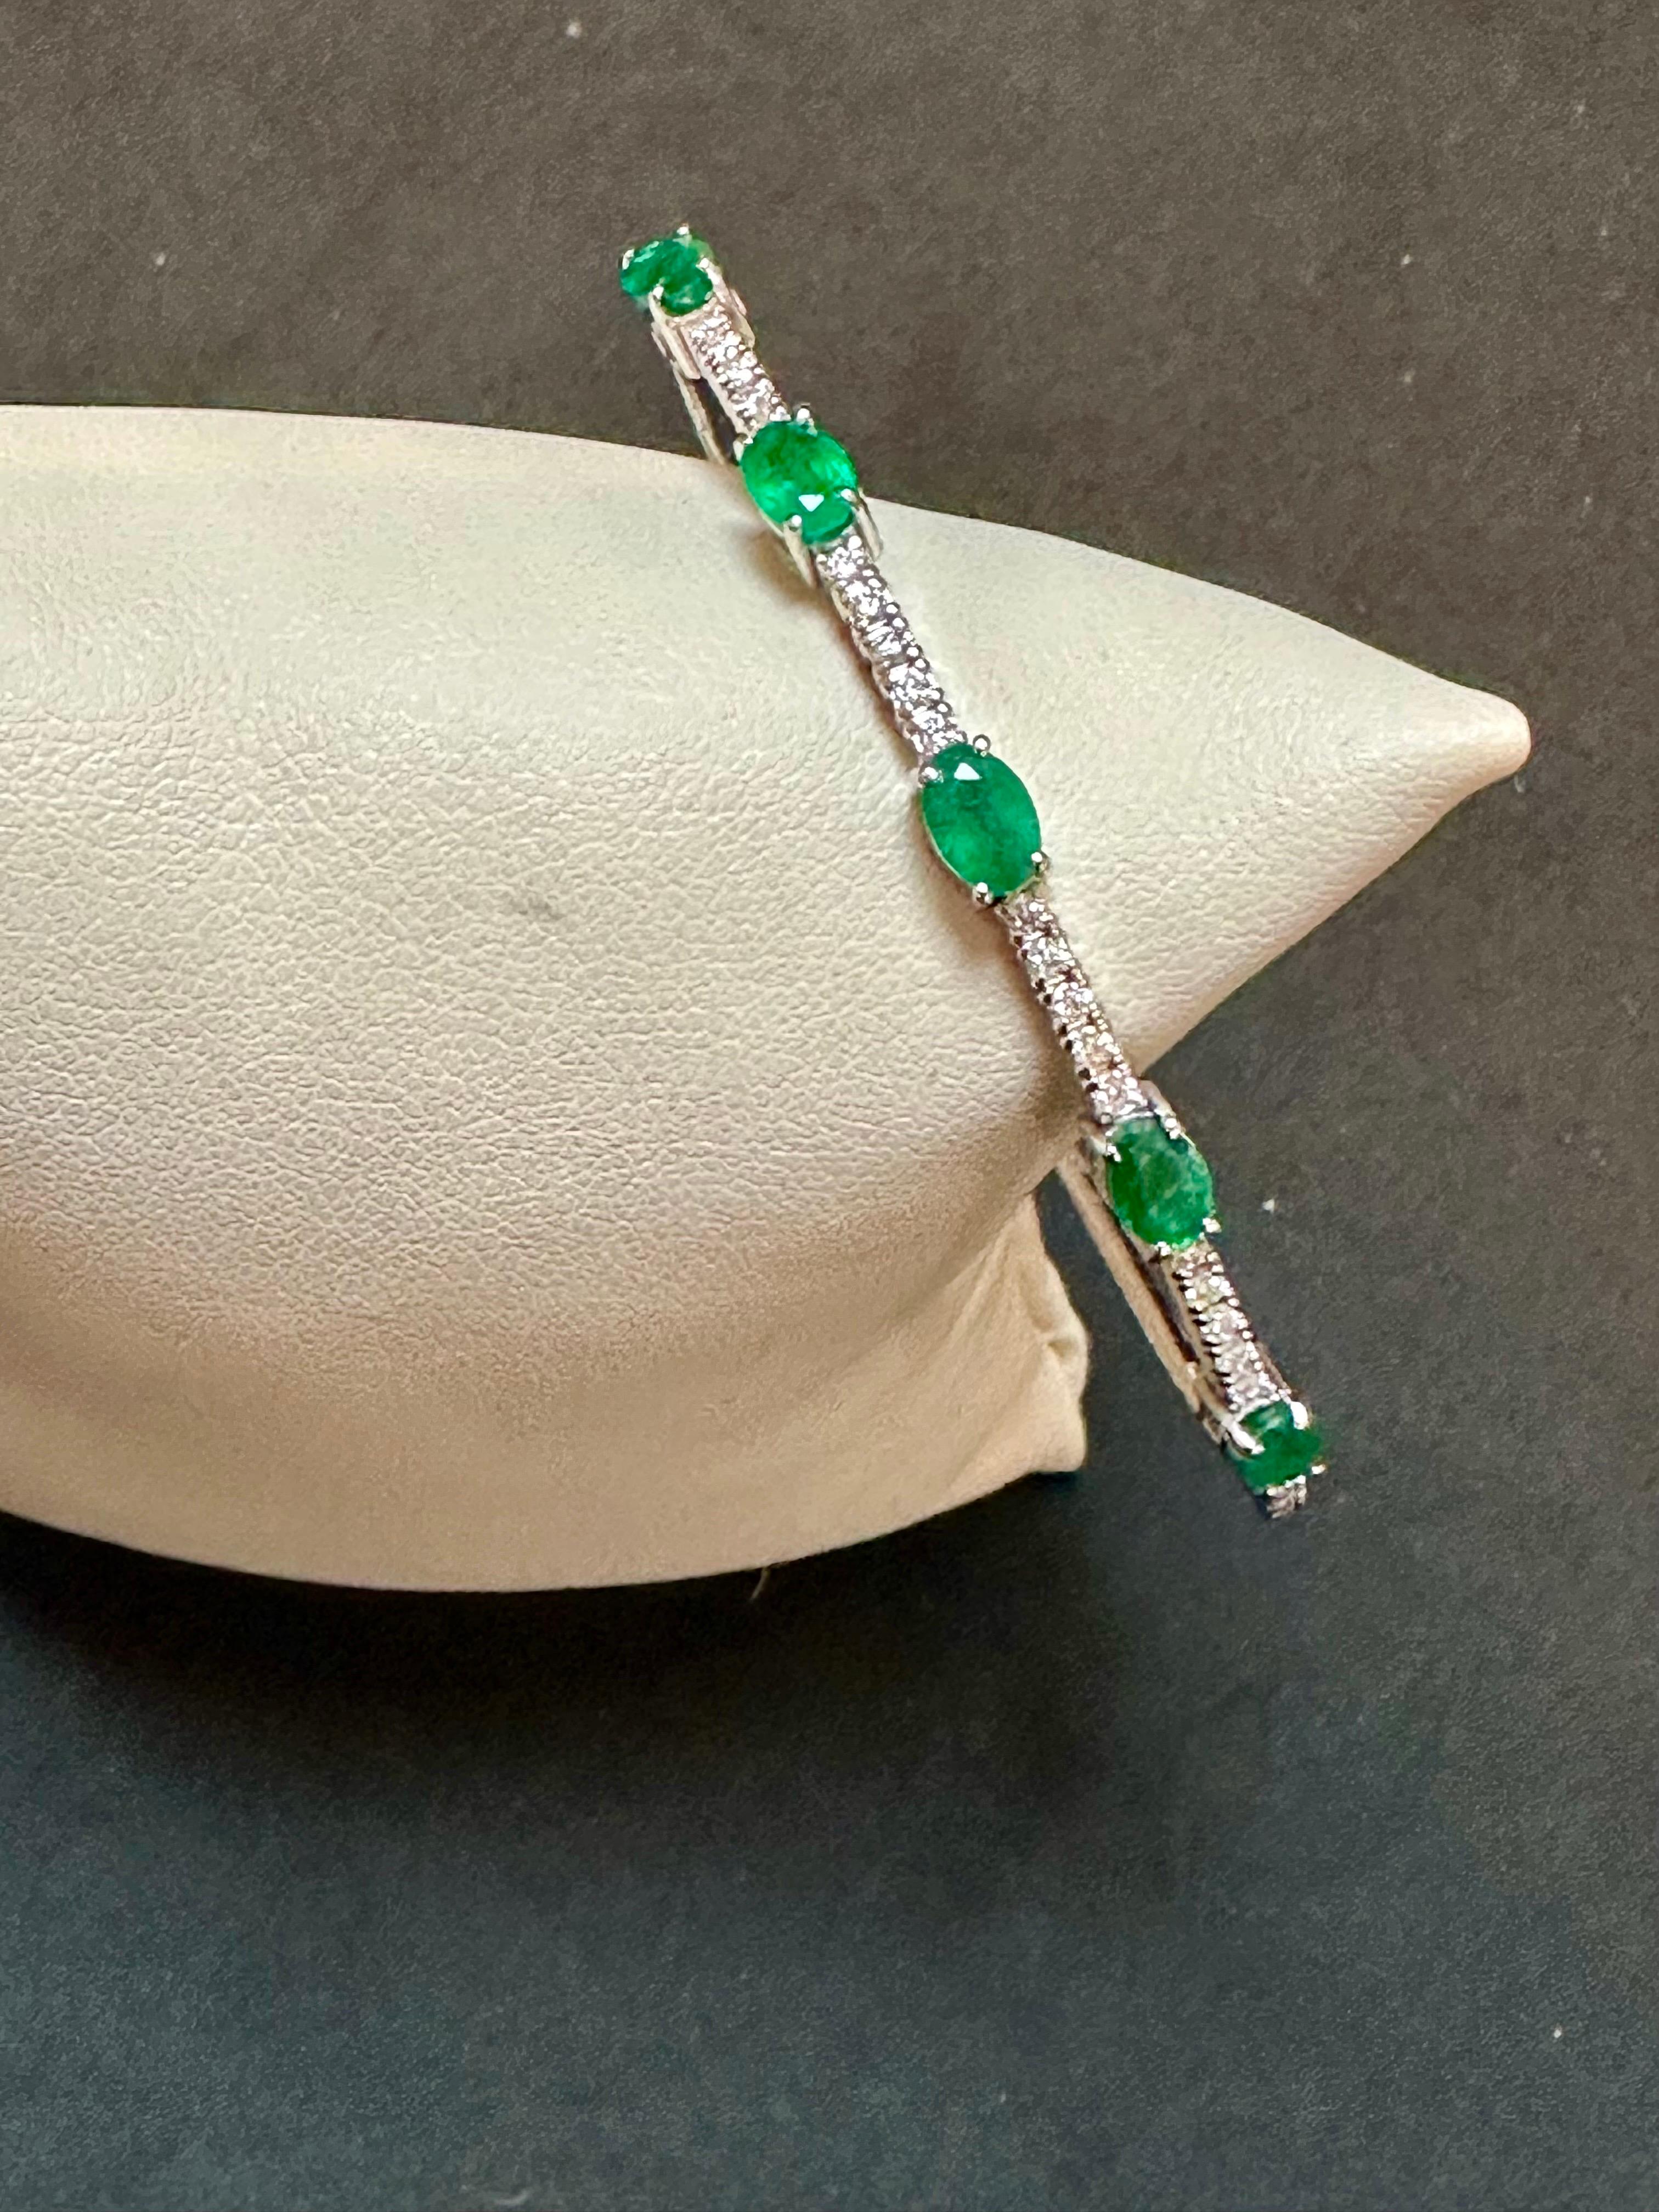 2 Carat Natural Brazilian Emerald & Diamond Bangle Bracelet 14 Karat White Gold In Excellent Condition For Sale In New York, NY